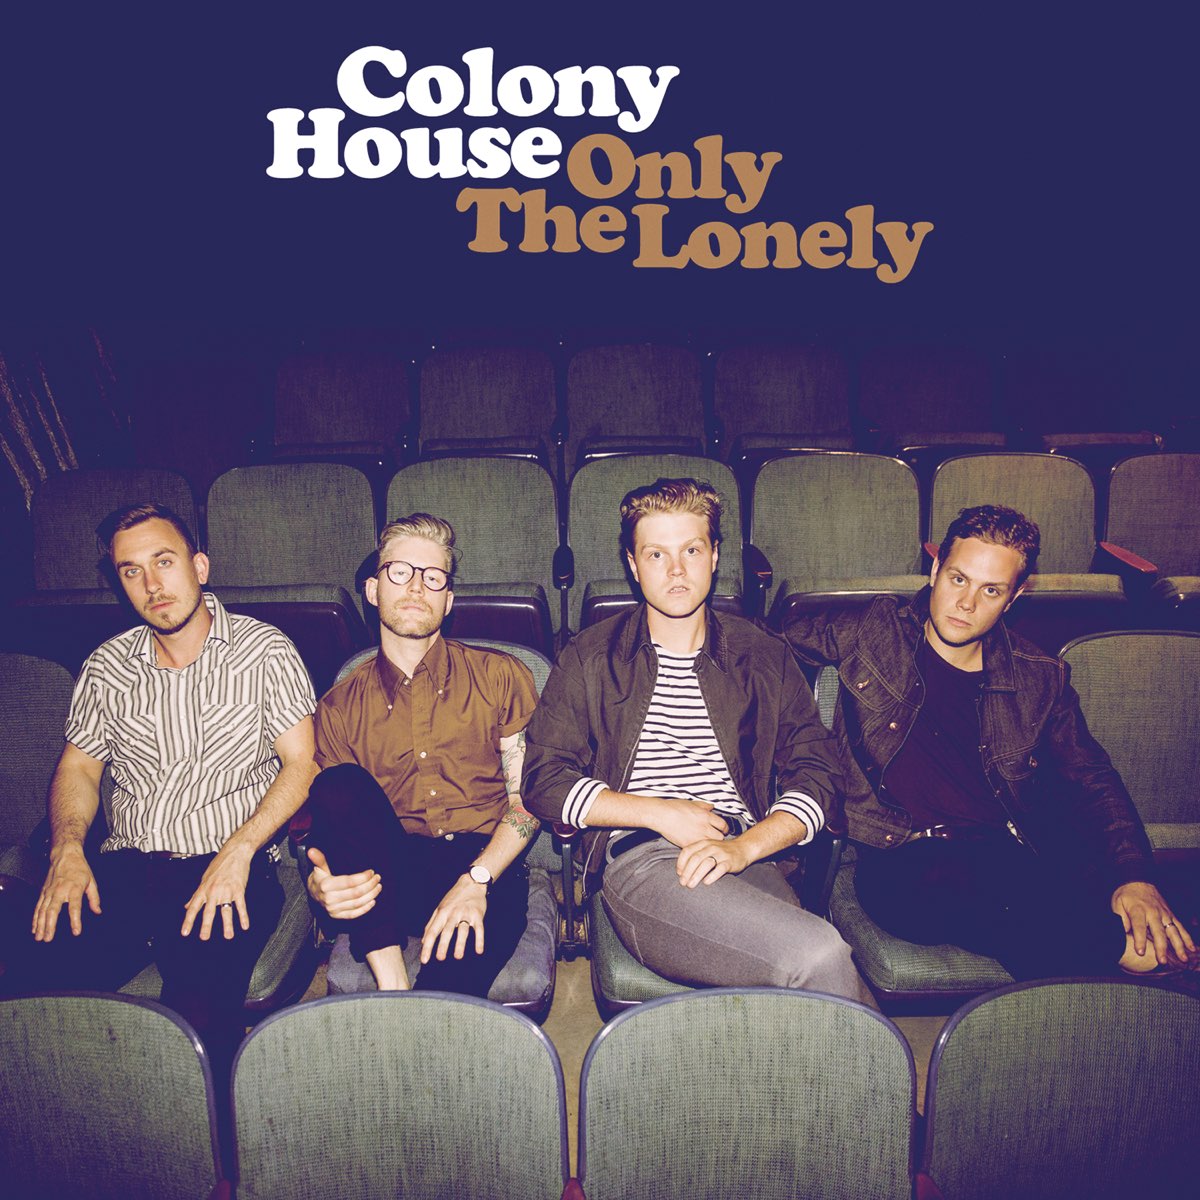 Does this house to you. Lonely only. Colony House only the Lonely Review. Colony House th. Colony House - cannot do this Alone.